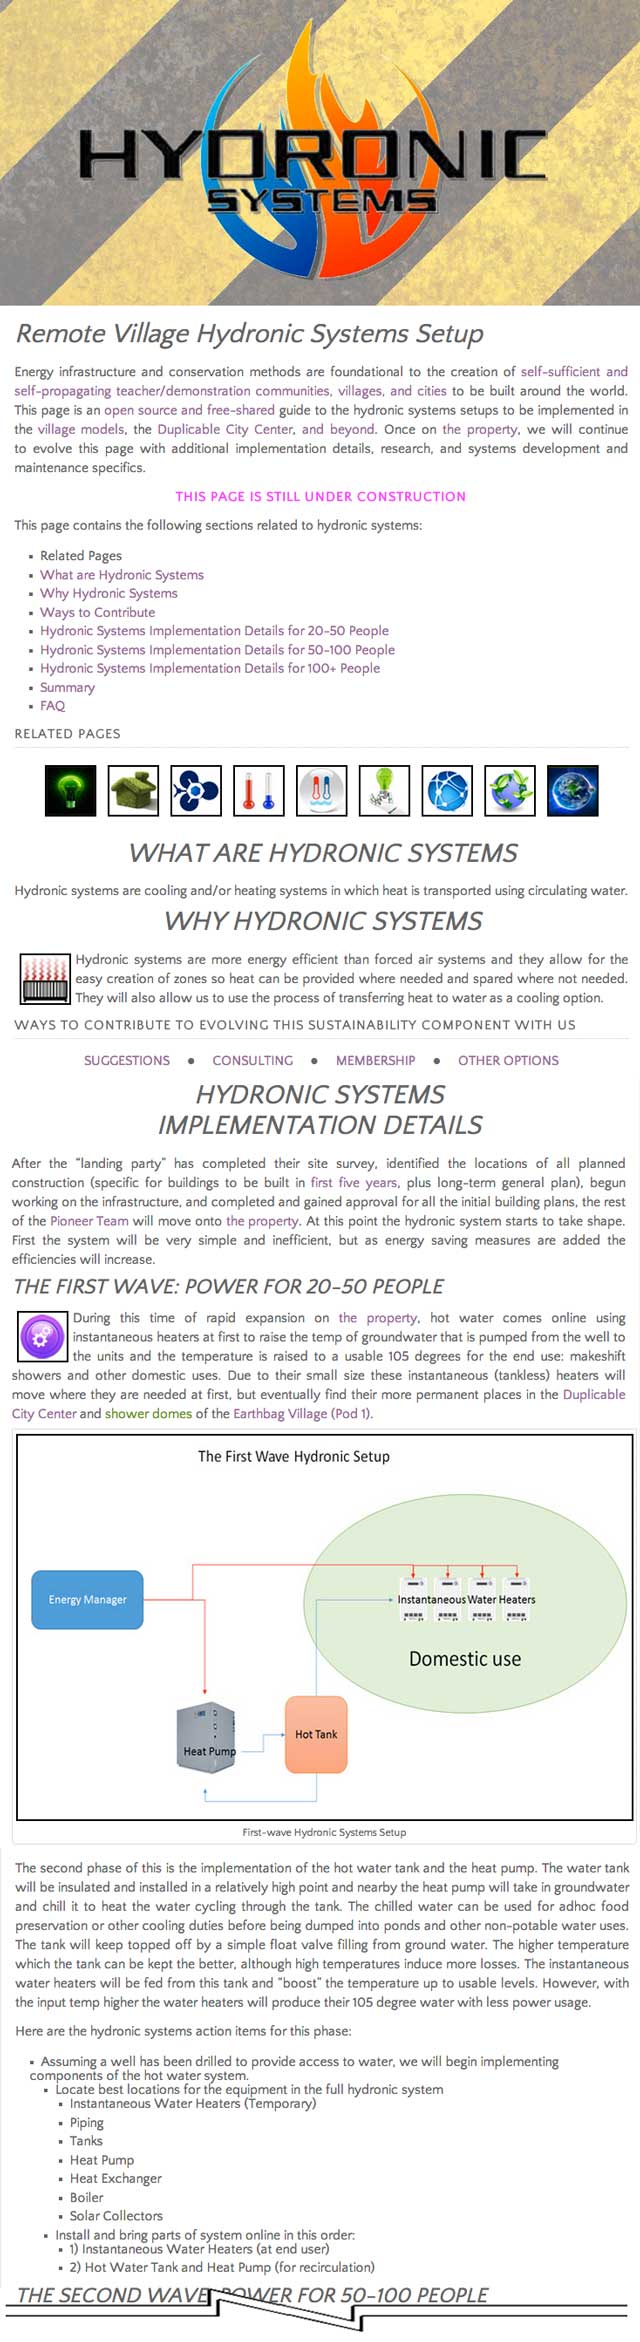 Hydronic Systems page, 20-50 people, One Community